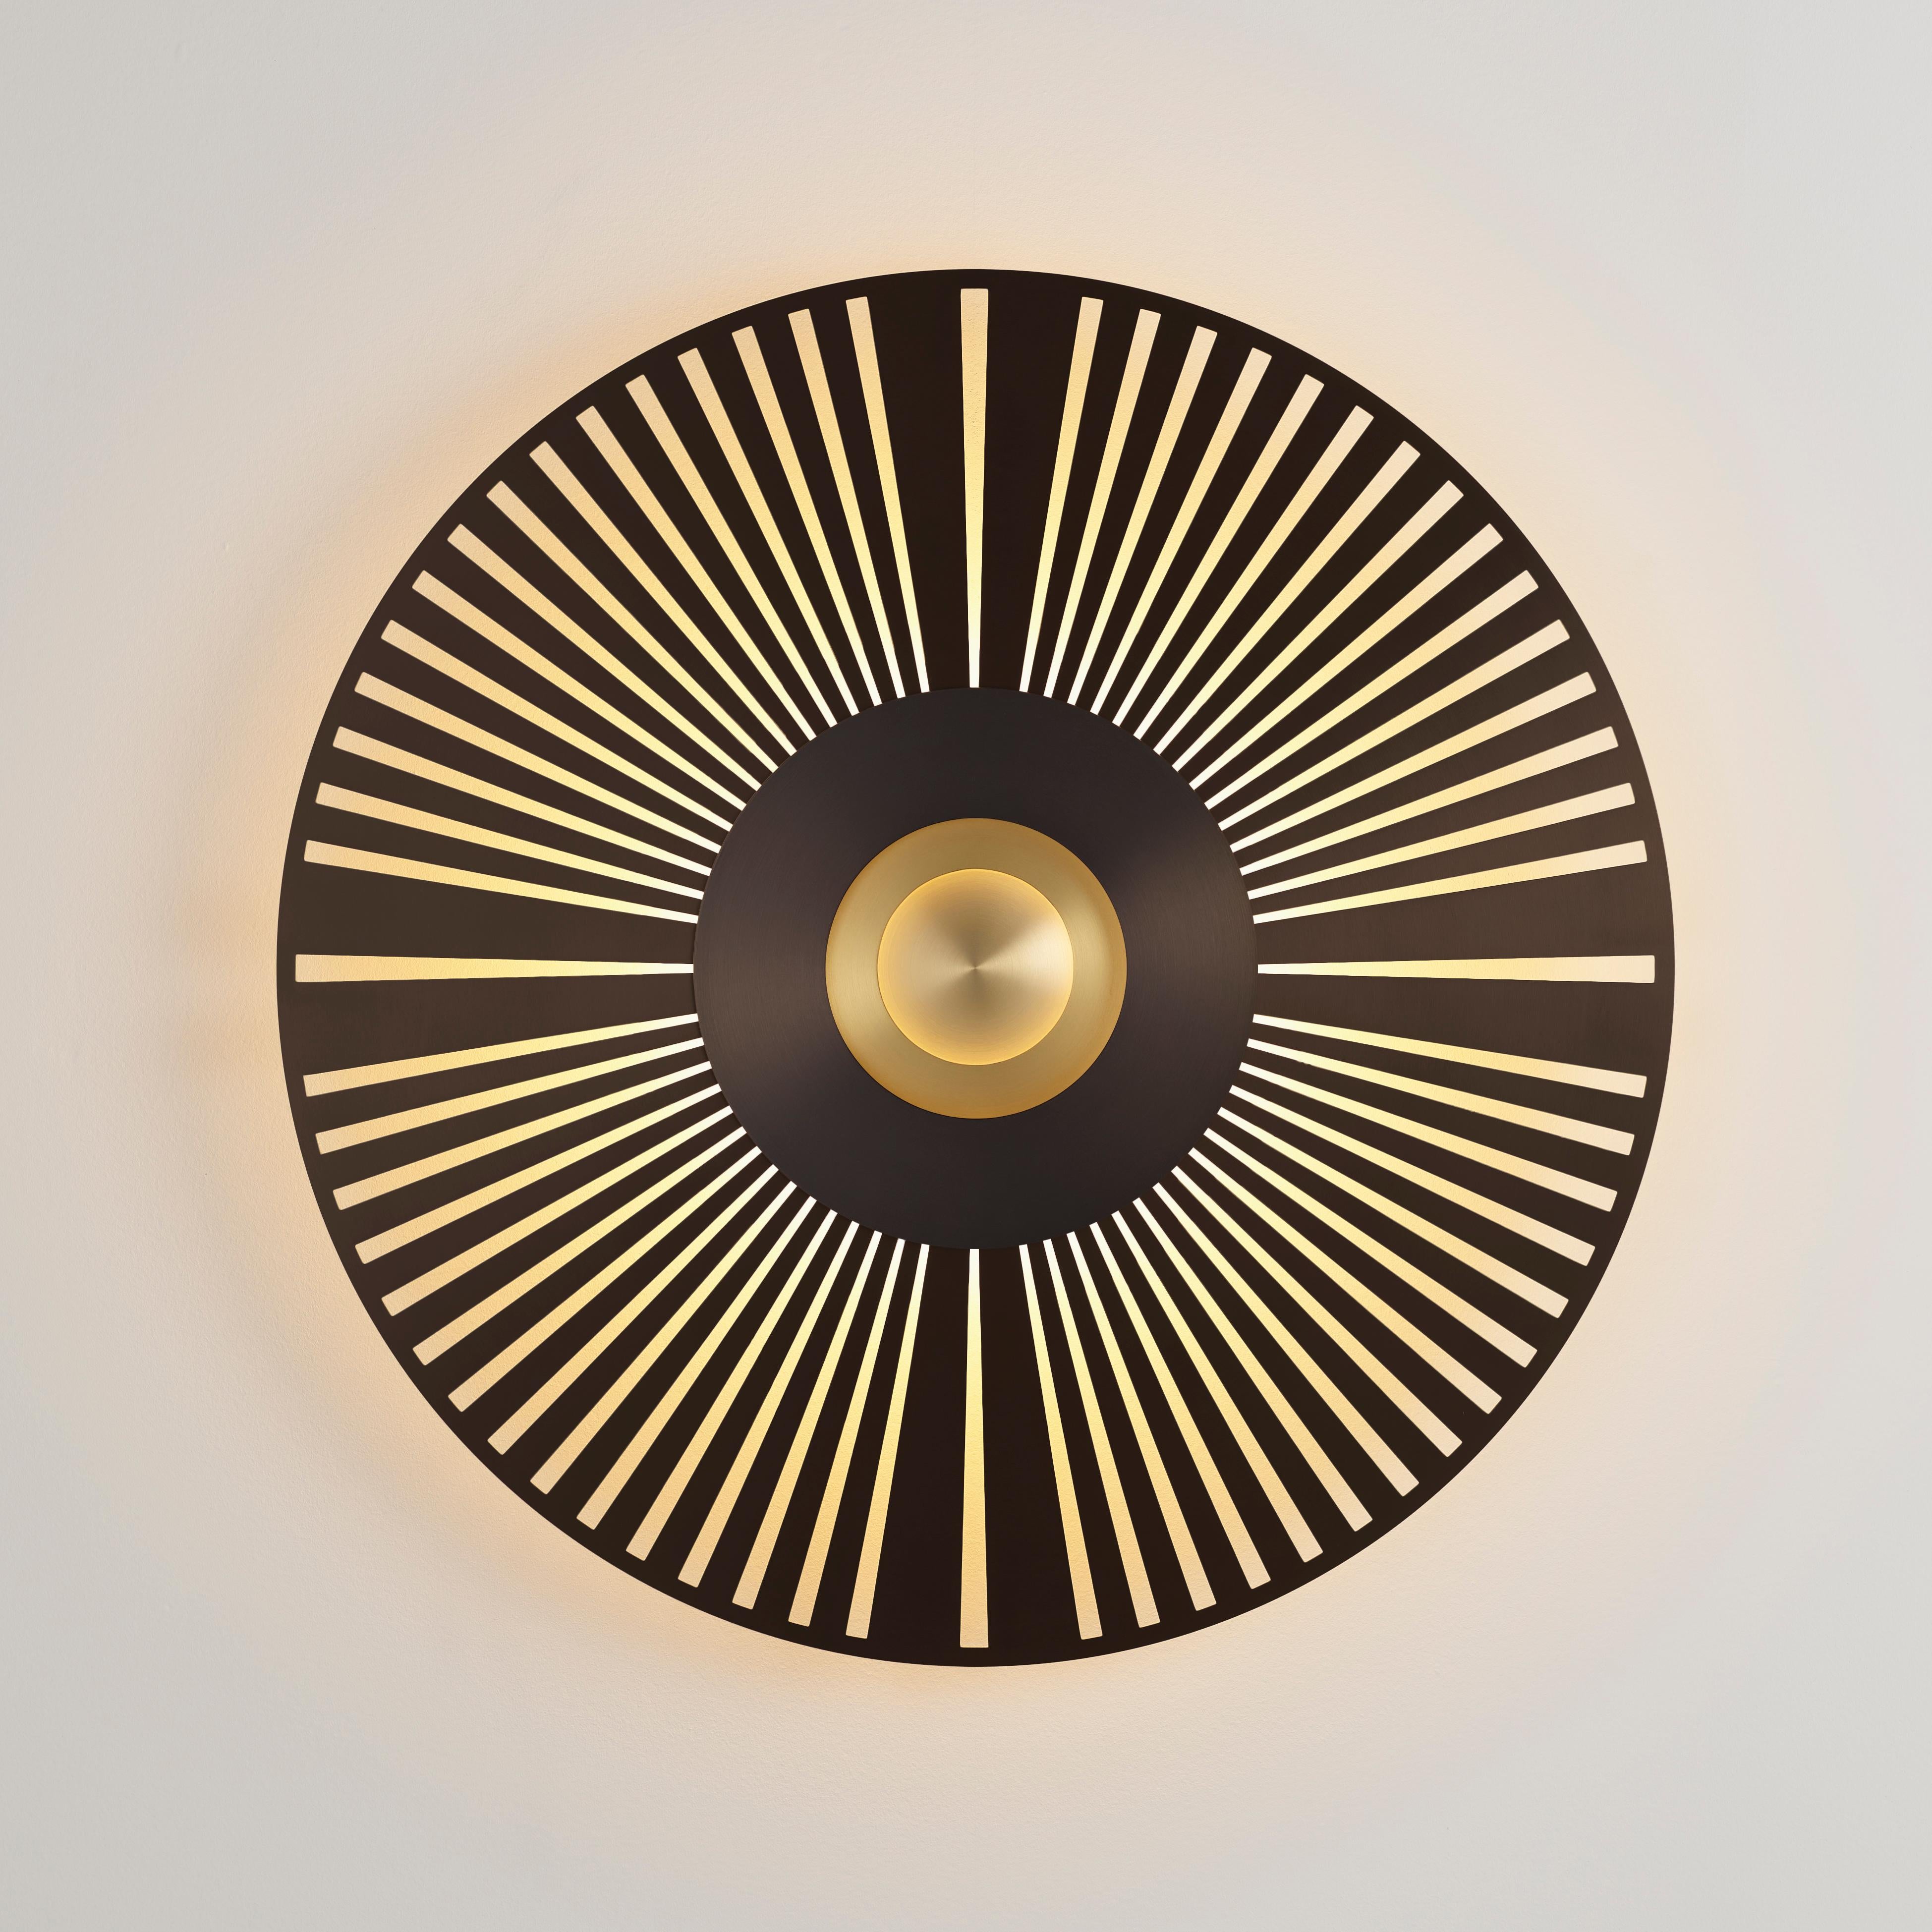 Atmos Eclat Wall Light by Emilie Cathelineau
Dimensions: D80 cm
Materials: Solid brass, Polycarbonate diffuser.
Others finishes and dimensions are available.

All our lamps can be wired according to each country. If sold to the USA it will be